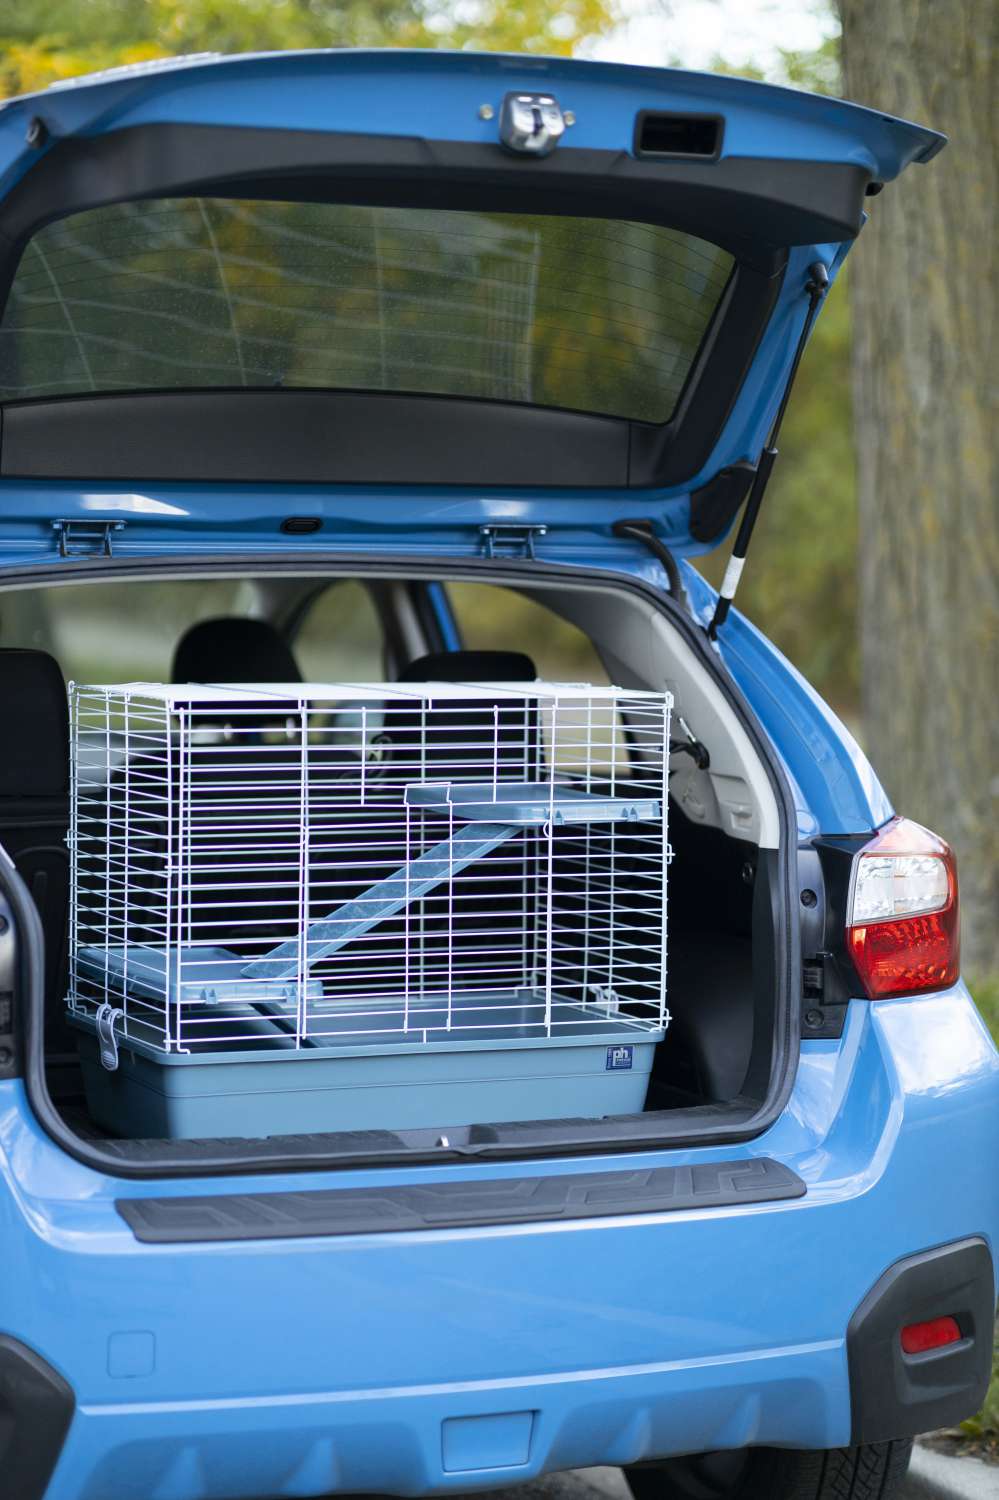 Adult Ferret Home/Travel Cage Blue 529BLUE Prevue Pet Products